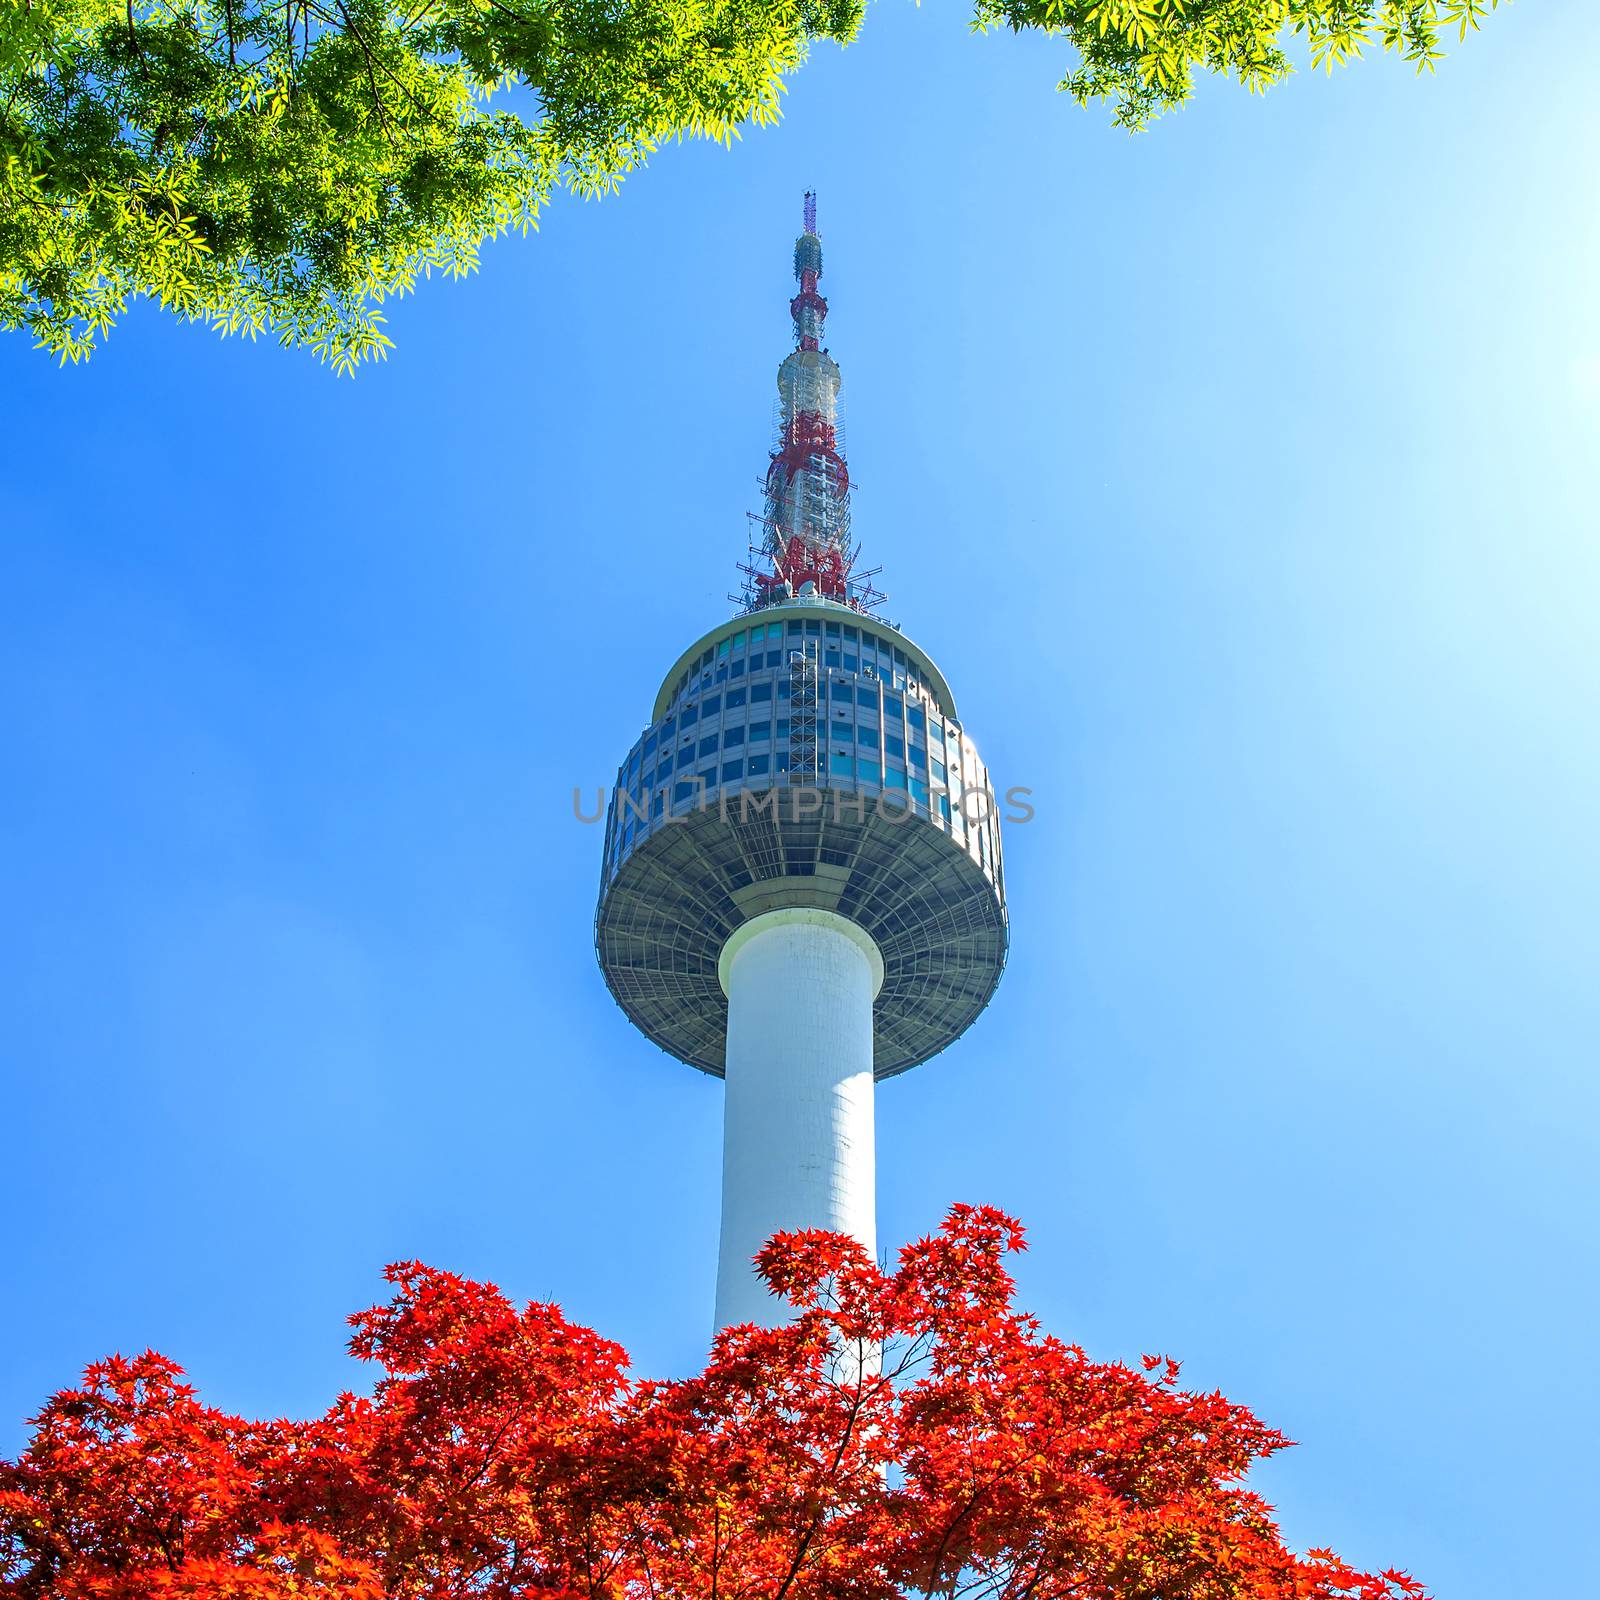 Seoul Tower and red autumn maple leaves at Namsan mountain in South Korea.